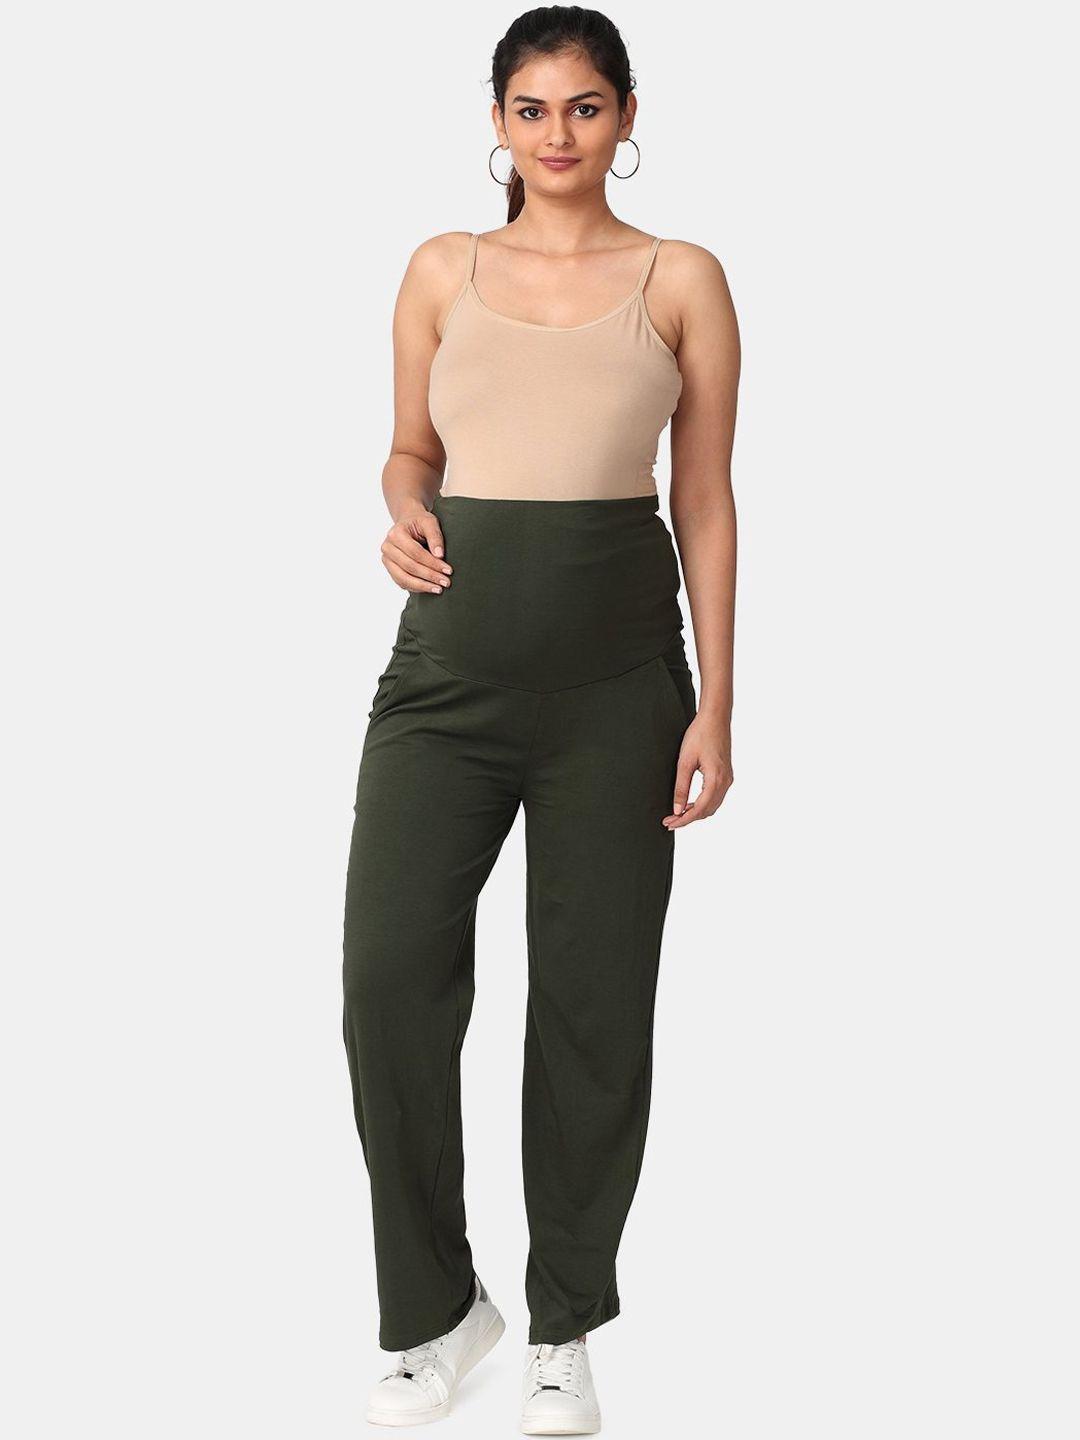 the mom store women olive green solid cotton maternity track pants